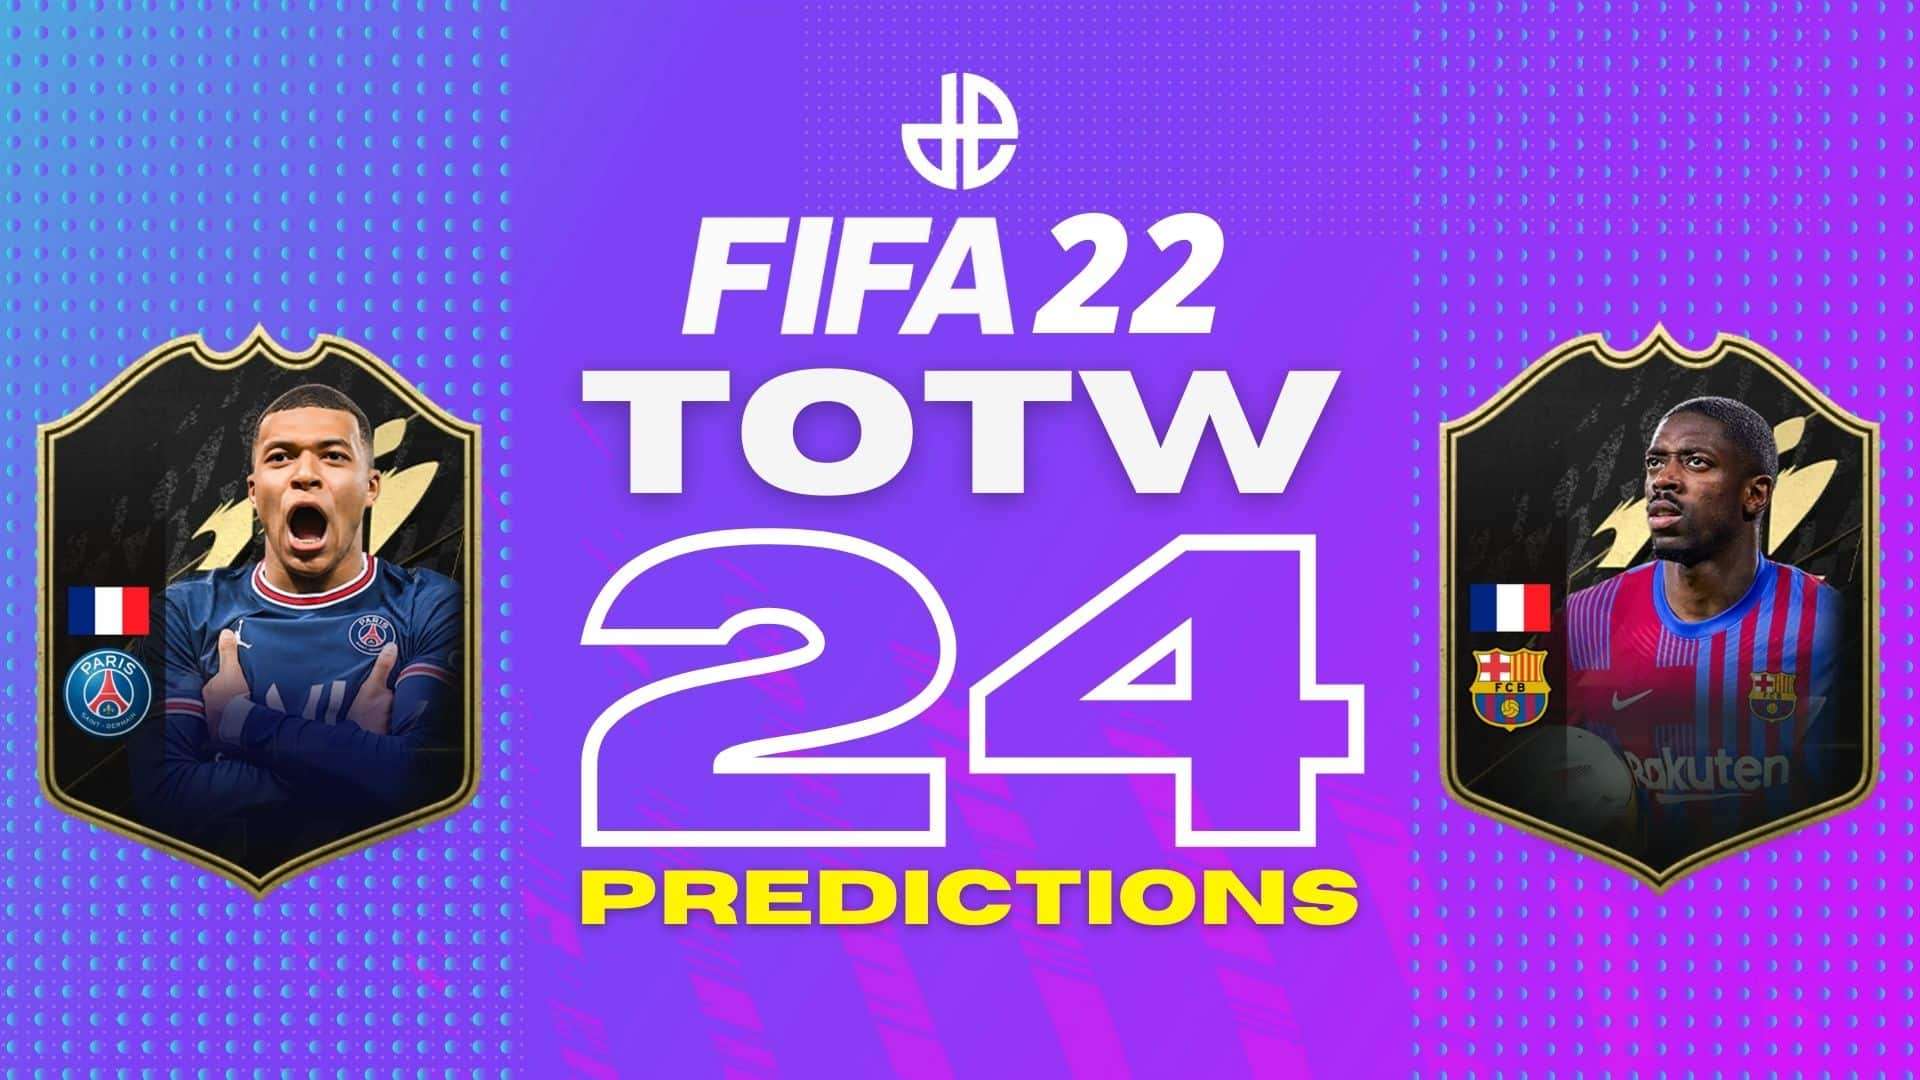 FIFA 22 TOTW 24 cards and predictions